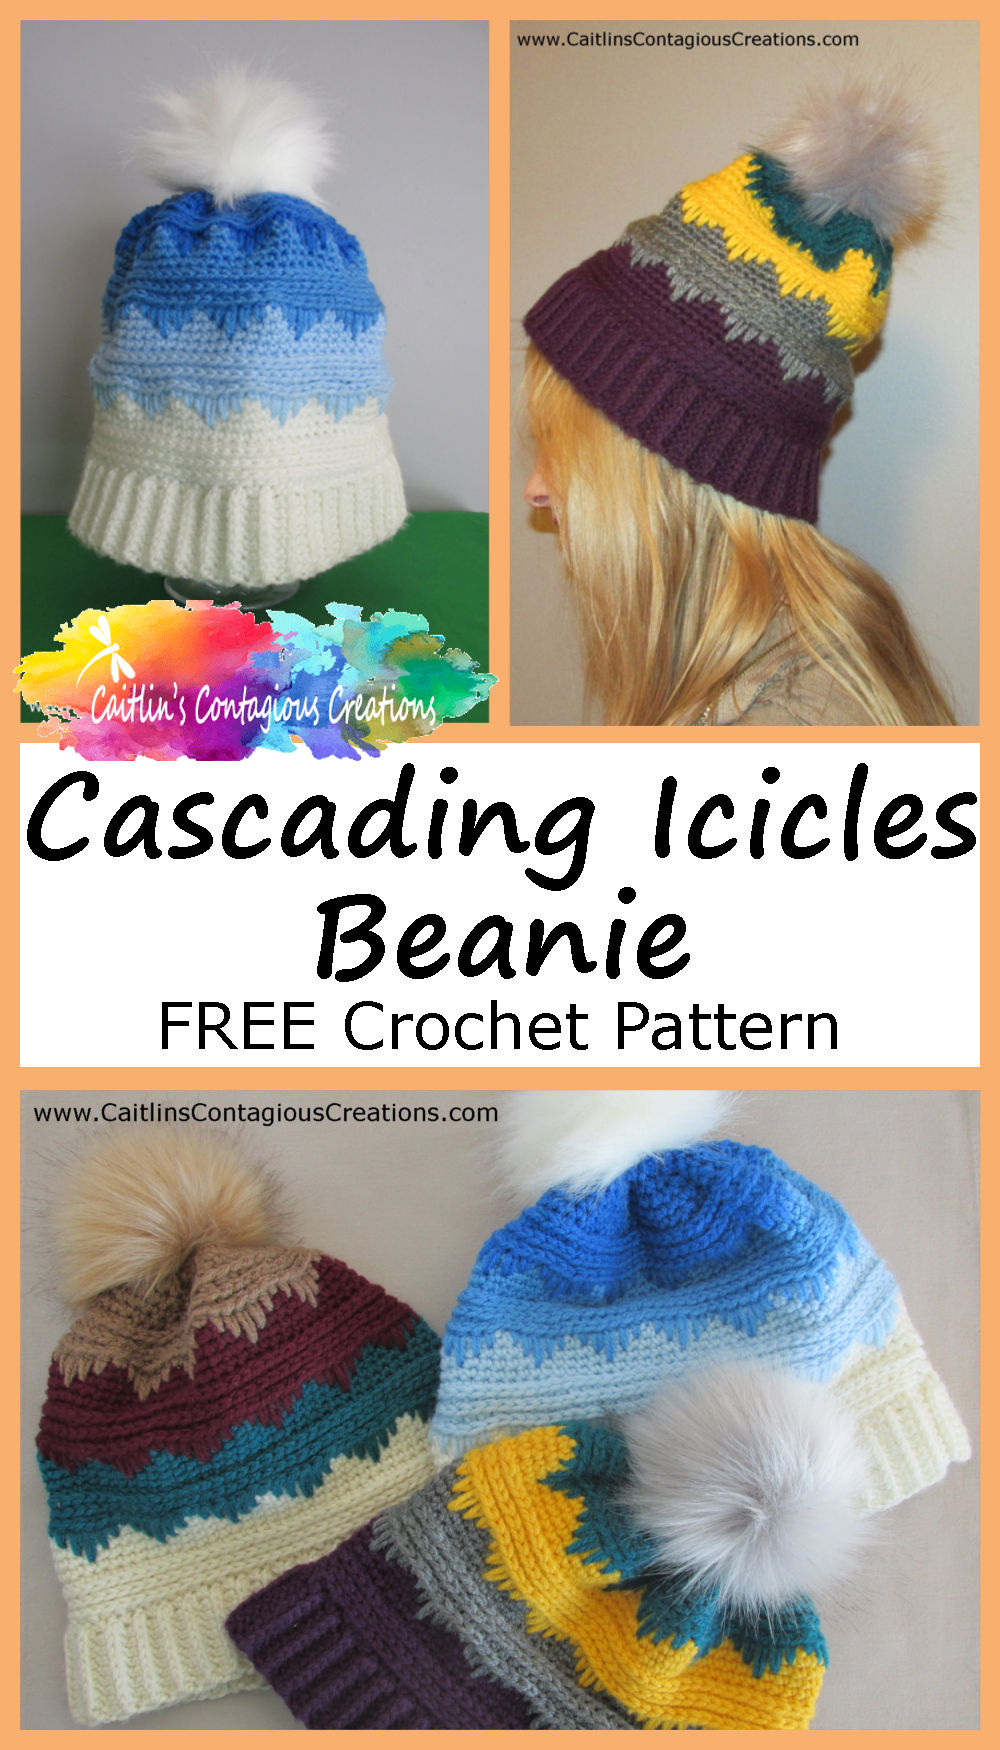 Free Cascading Icicles Beanie Crochet Pattern from Caitlin's Contagious Creations. The written pattern directions include a photo tutorial to make this hat in 3 adult sizes! This easy level crochet design includes instructions to make a messy bun ponytail hat OR a regular winter cap!